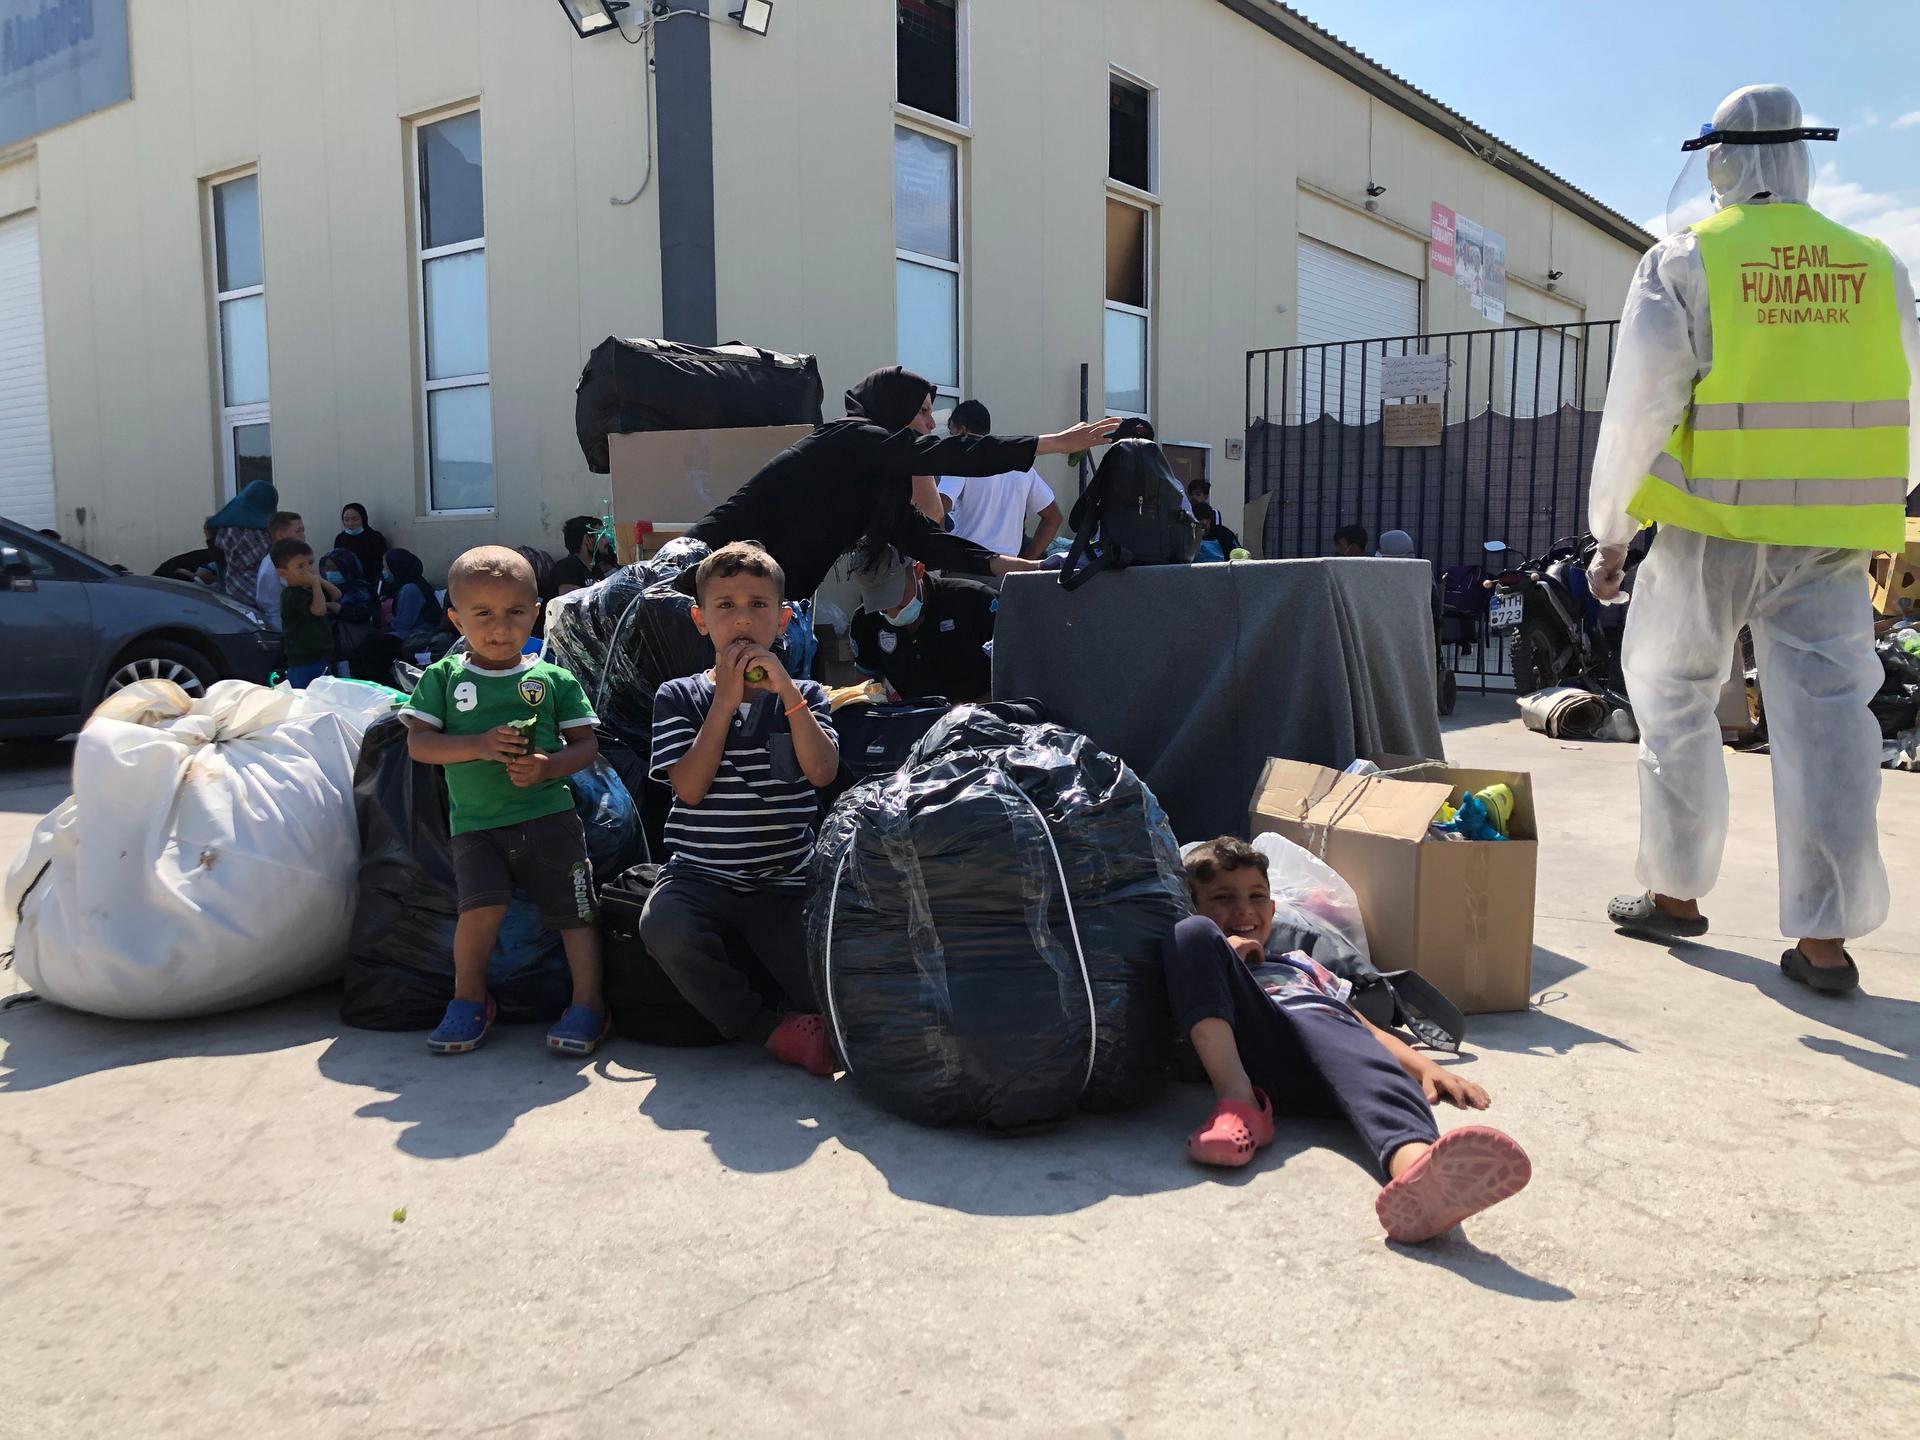 Since the fire that engulfed Moria camp on Lesbos island nearly two weeks ago, more than 500 of the 12,000 displaced migrants and refugees have been taking shelter at a center run by Team Humanity, a nonprofit humanitarian organization. 